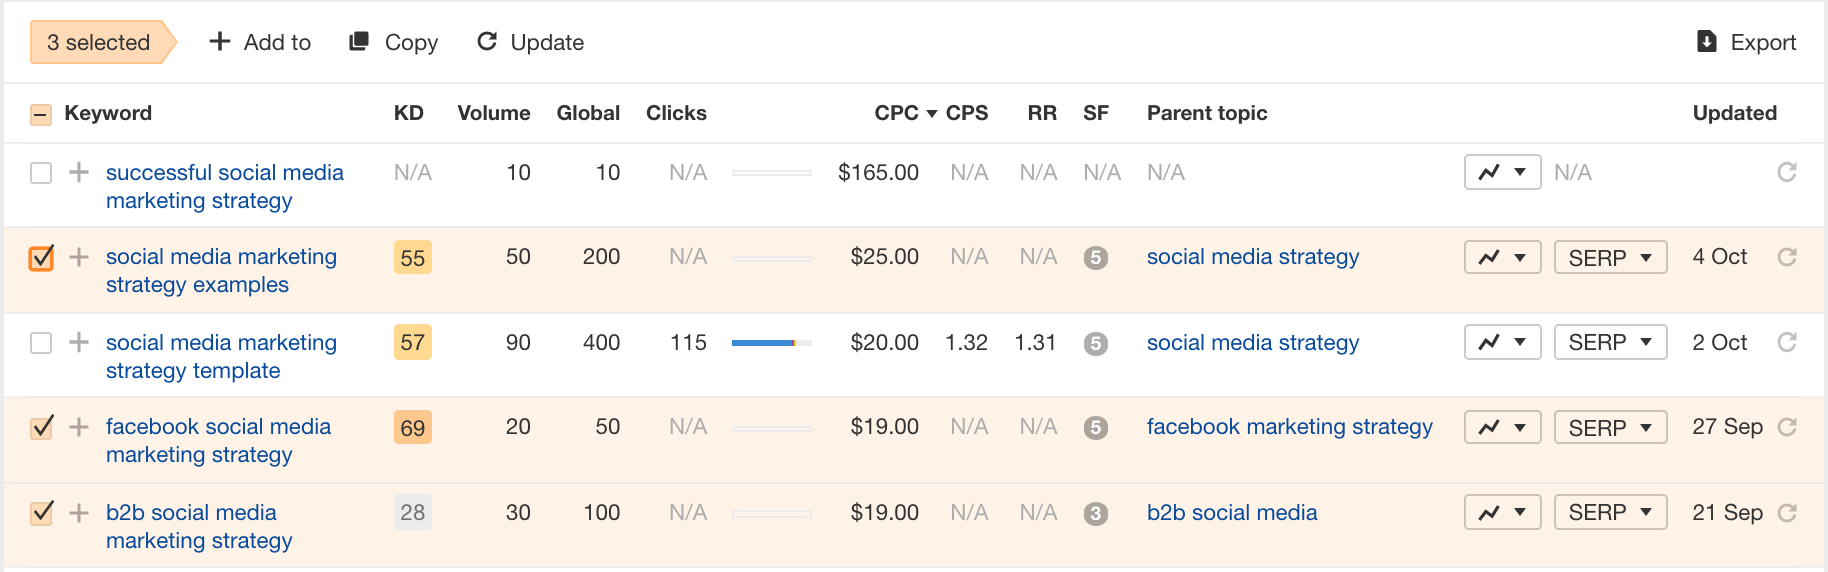 Search for related keywords in Ahrefs.